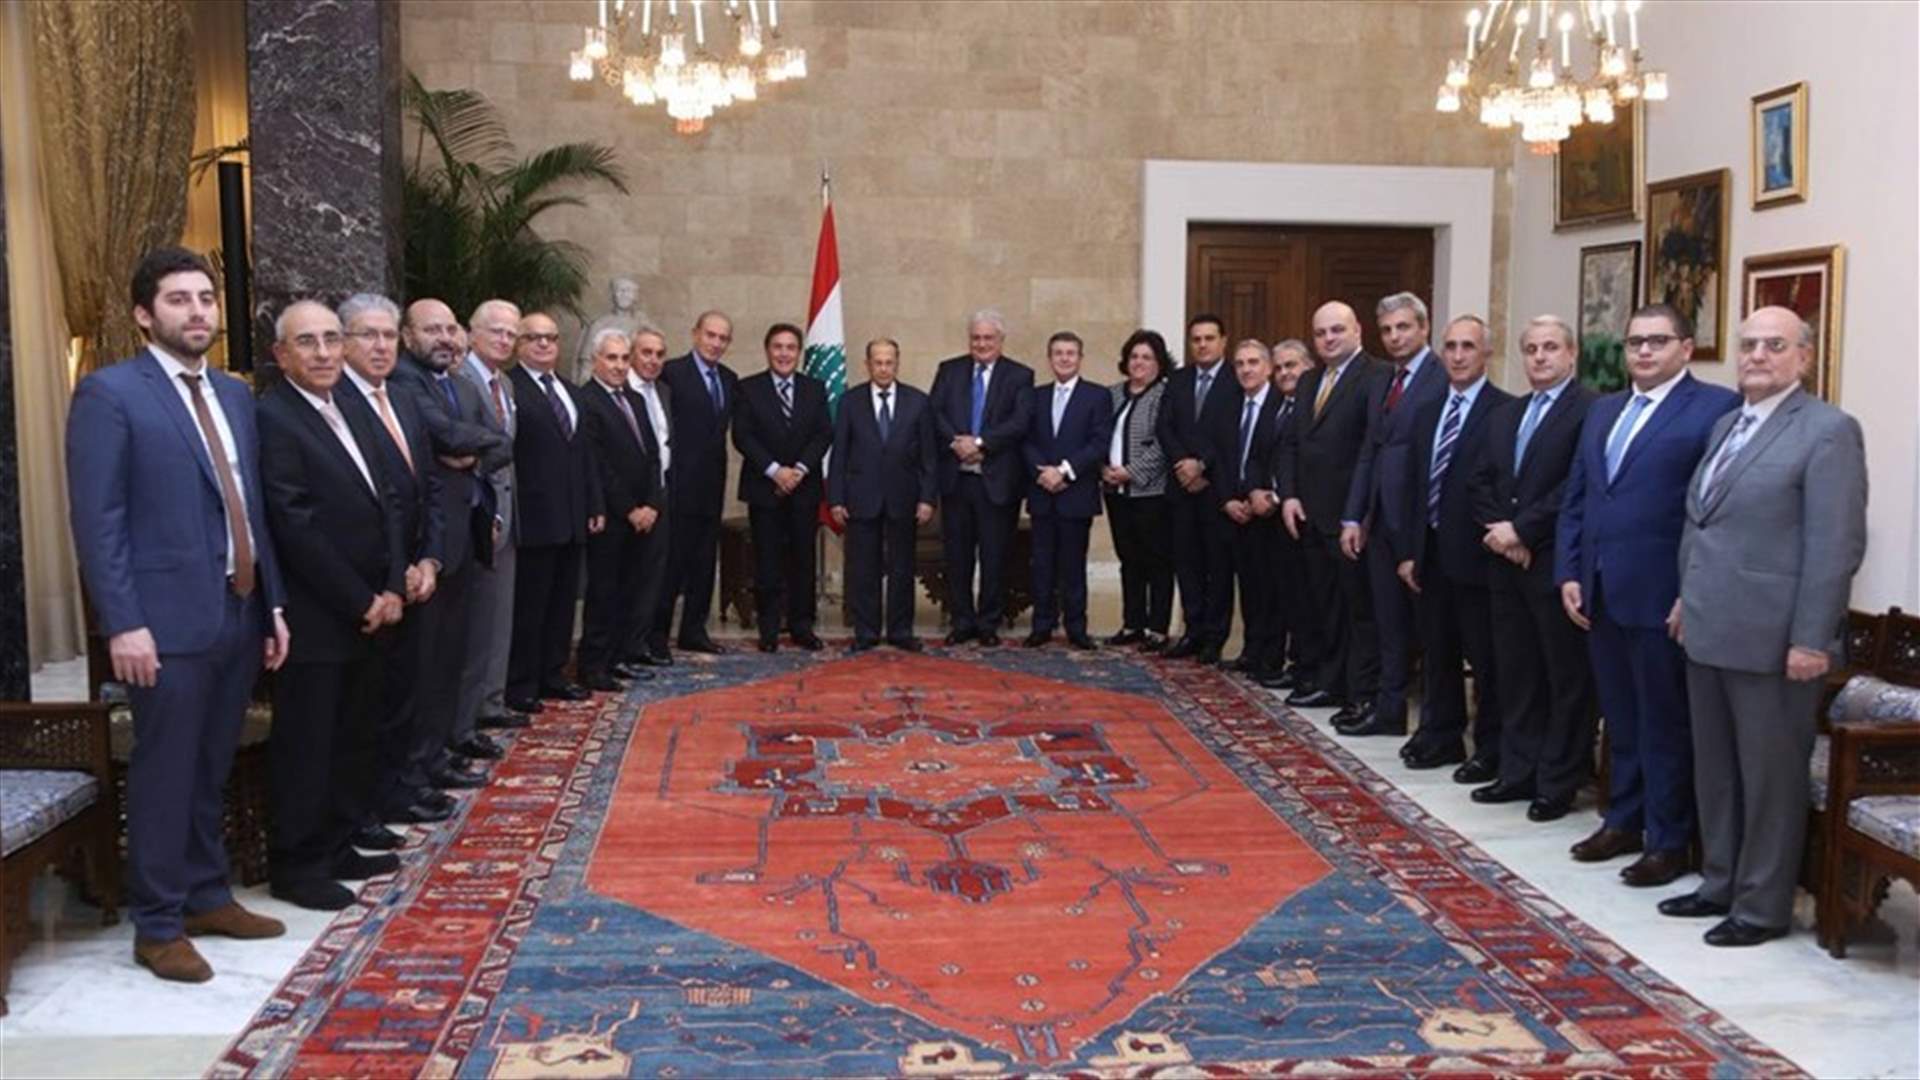 President Aoun says no fears over delay in cabinet formation process